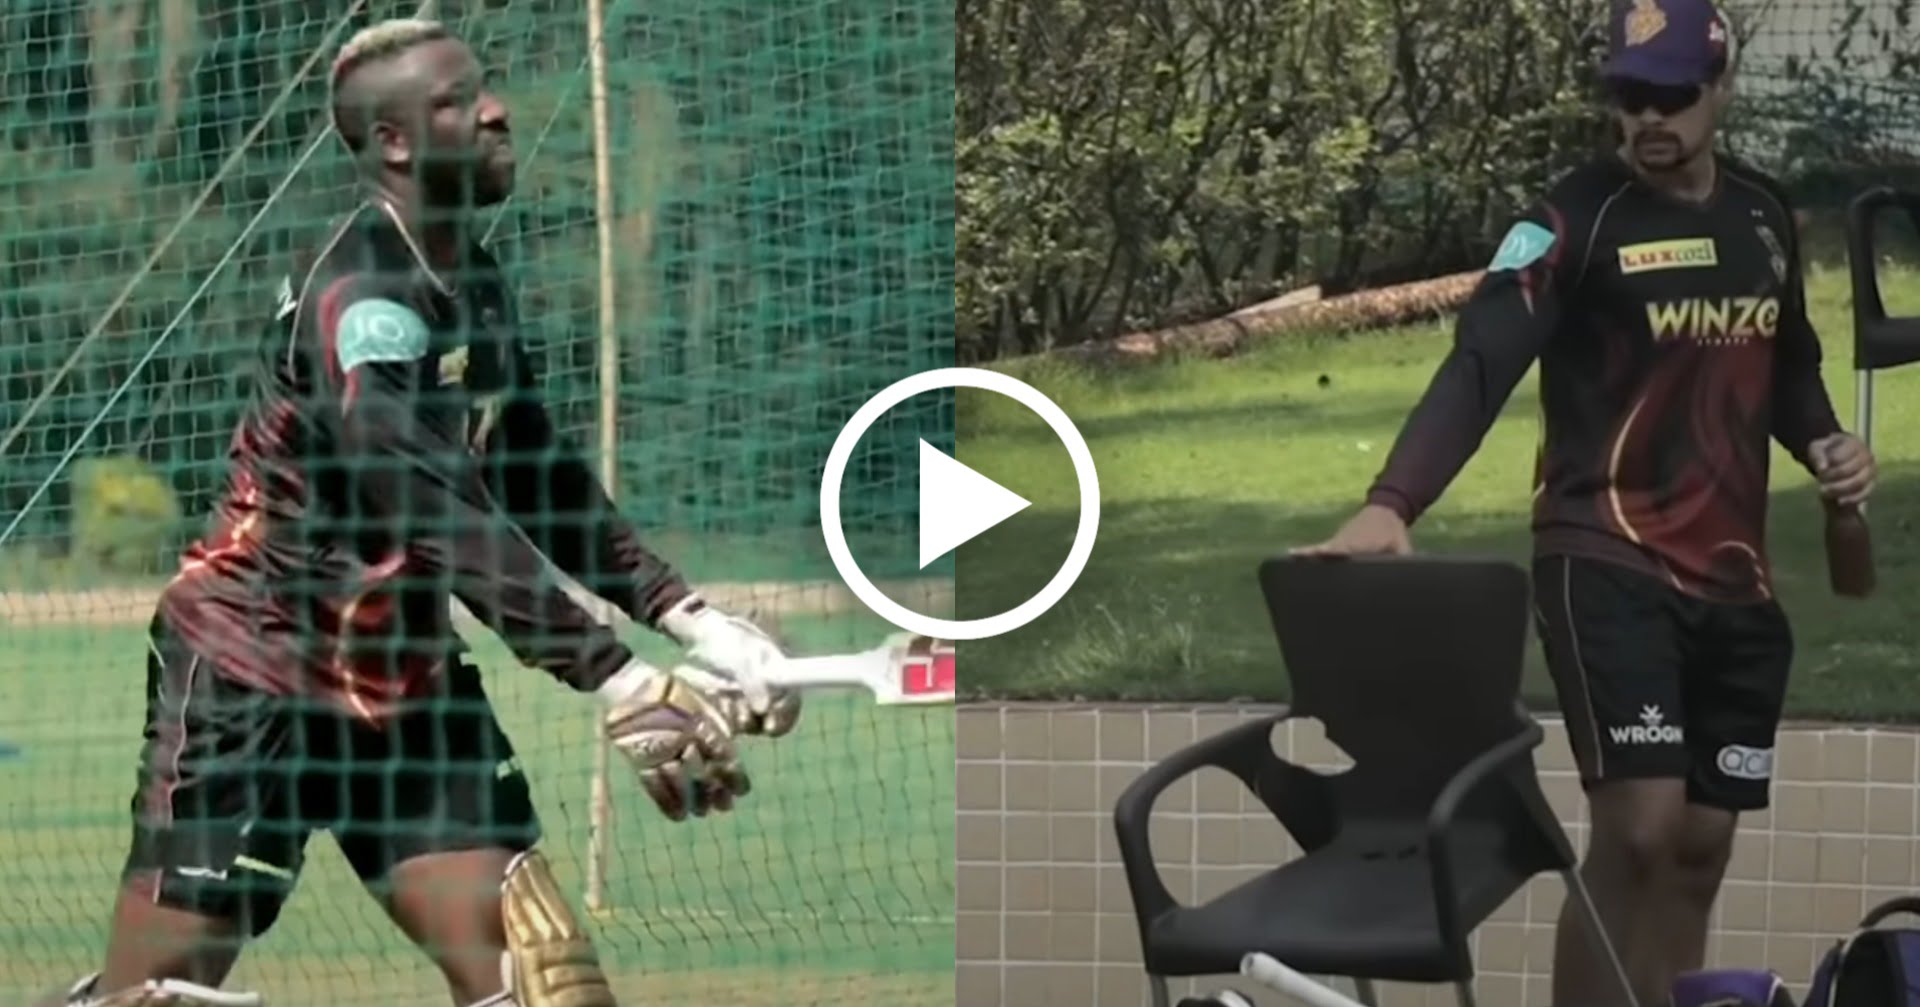 IPL 2022: Andre Russell Breaks Chair With A Six During Kolkata Knight  Riders Practice Session. Watch